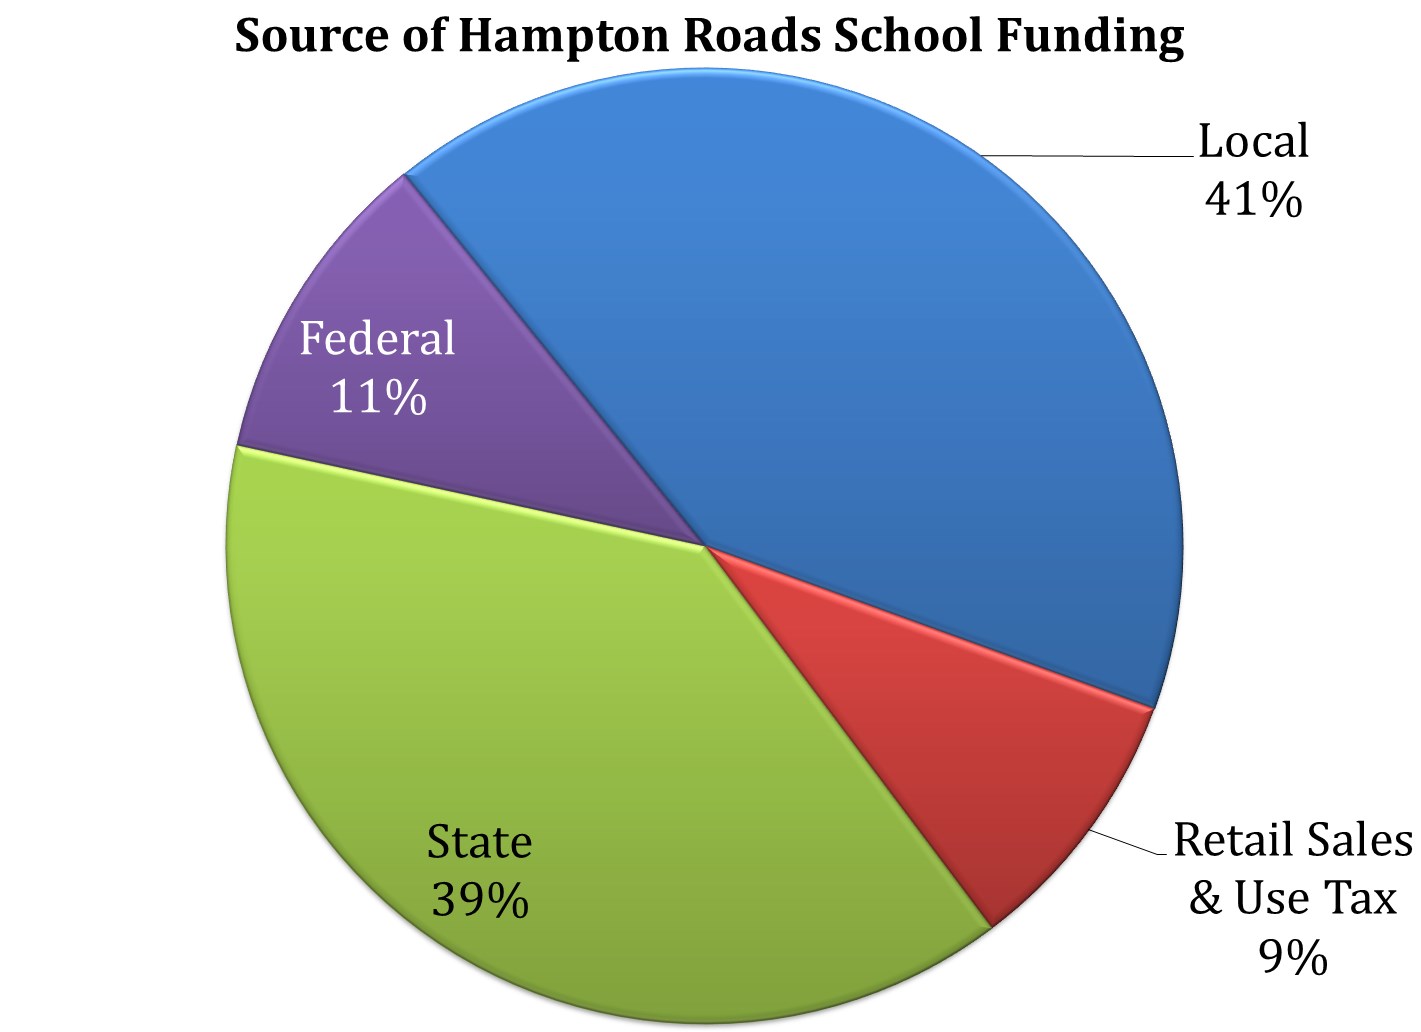 Hampton Roads 41% of all education spending comes from local sources, marking an increase from 2000 when local financing constituted 34% of education financing.